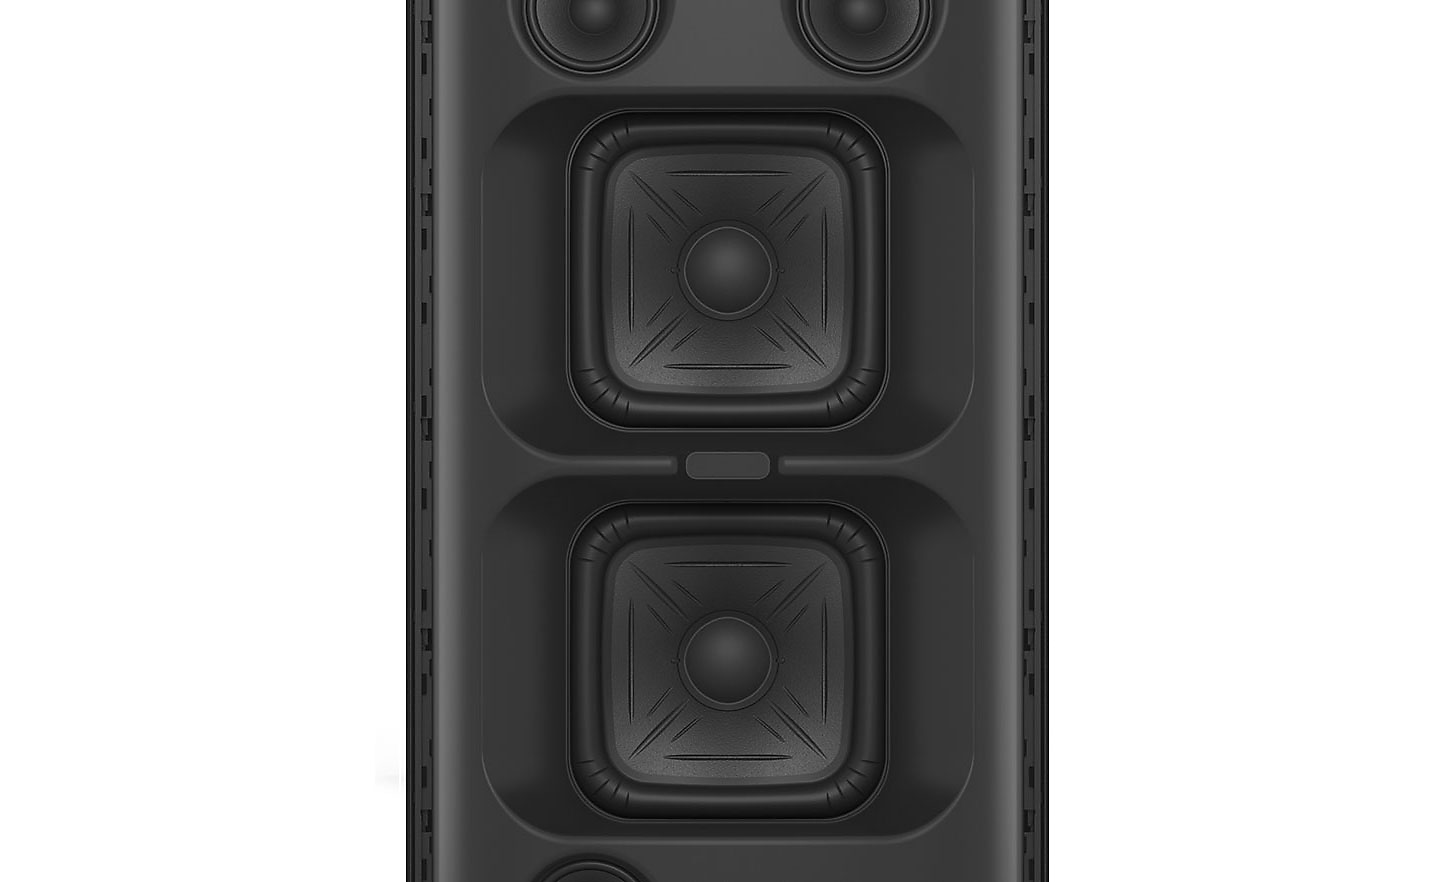 Close-up image of the Sony X-Balanced Speaker Unit in an SRS-XV800 speaker